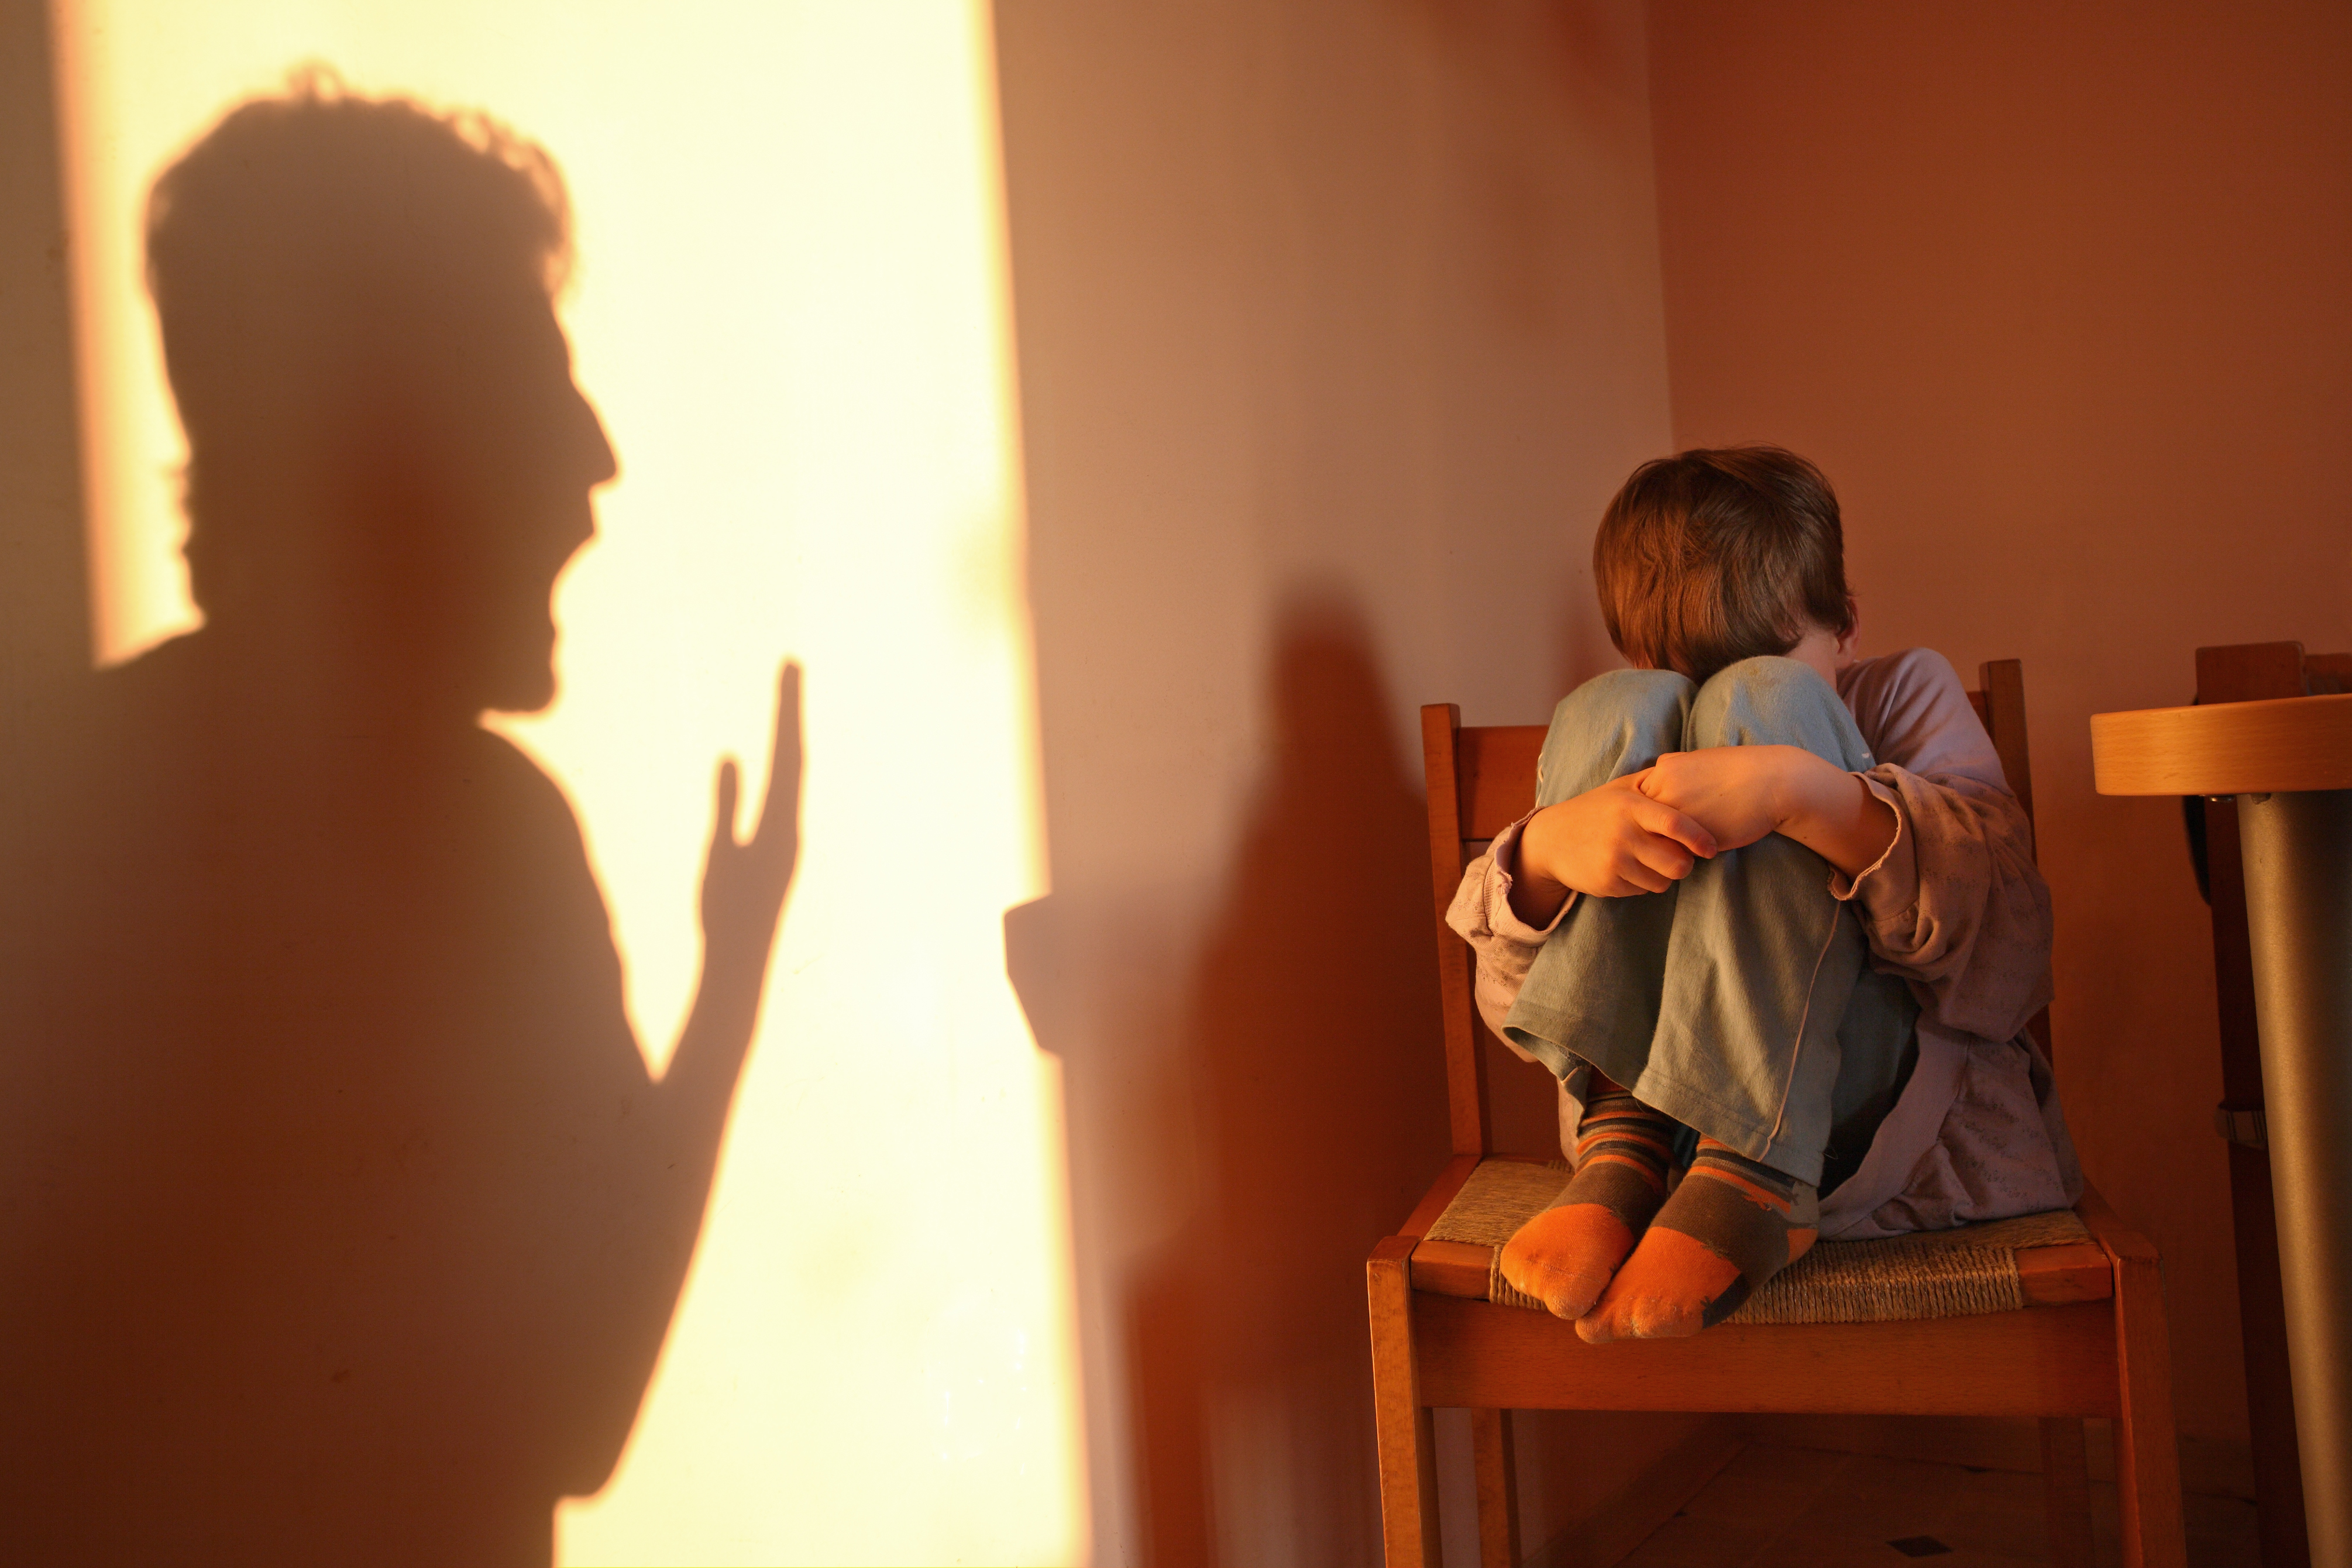 A scared child with the shadow of a man shouting at him | Source: Getty Images